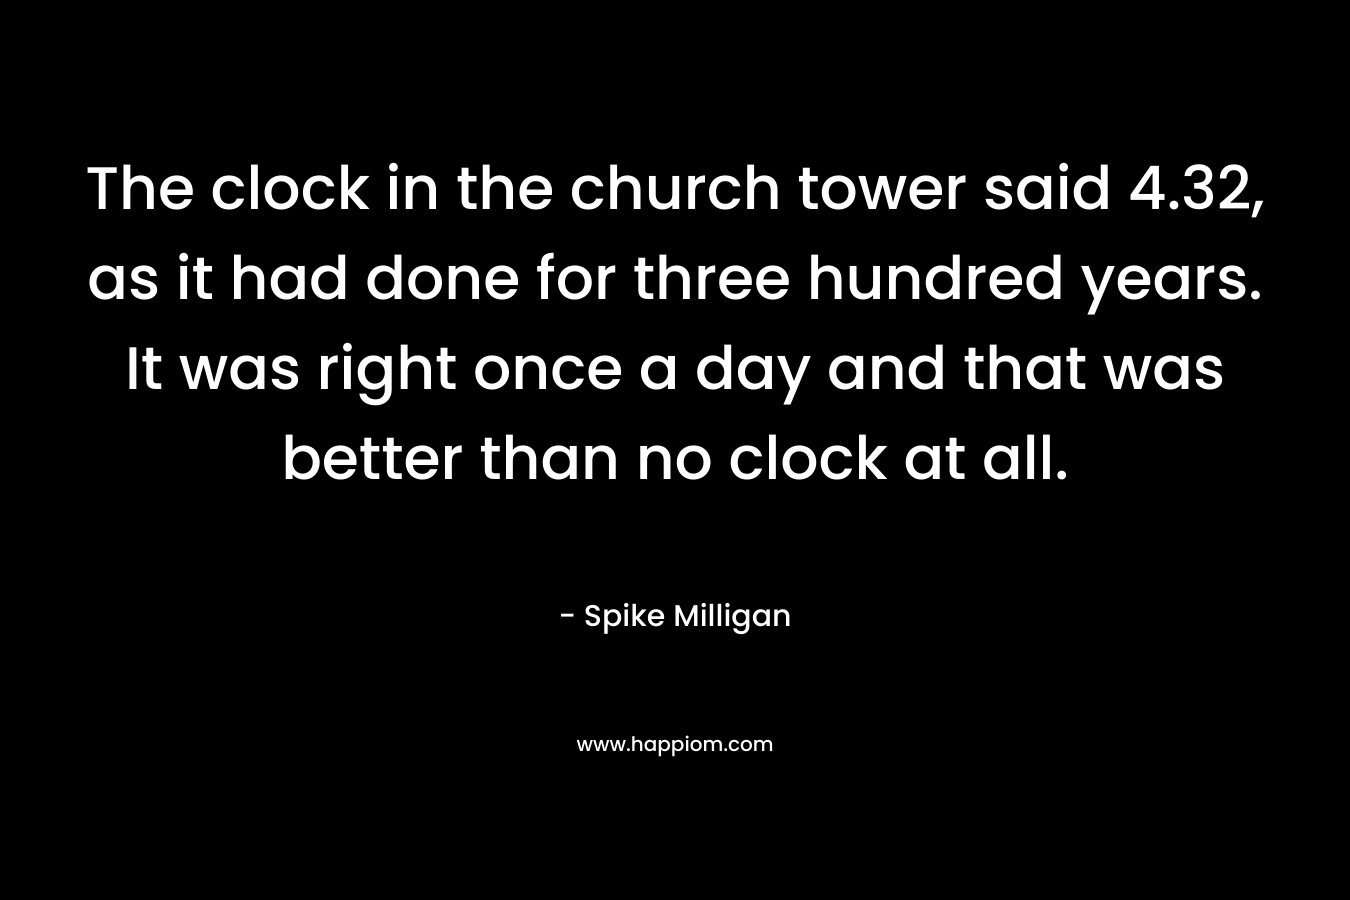 The clock in the church tower said 4.32, as it had done for three hundred years. It was right once a day and that was better than no clock at all. – Spike Milligan